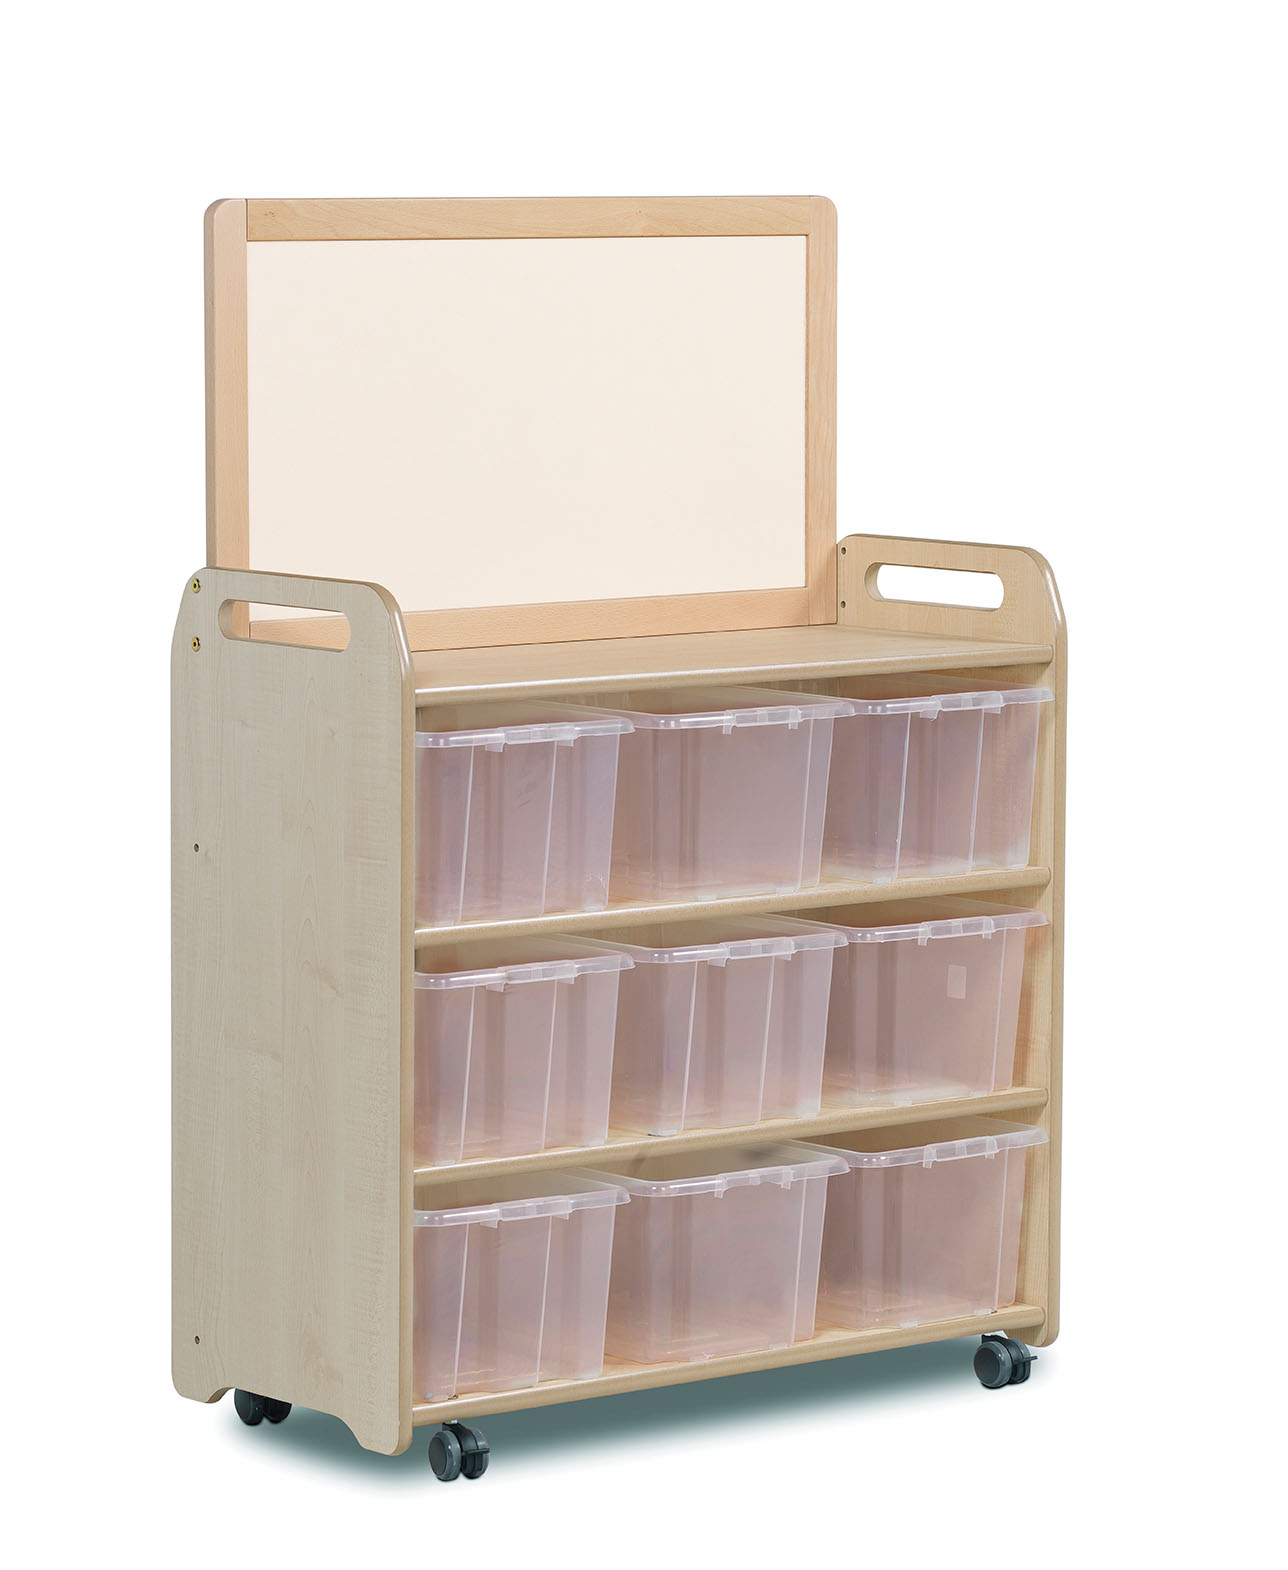 PT536-Millhouse-Early-Years-Furniture-Mobile-Shelf-With-Top-Add-On-20Clear-Tubs_Main_RGB.jpg